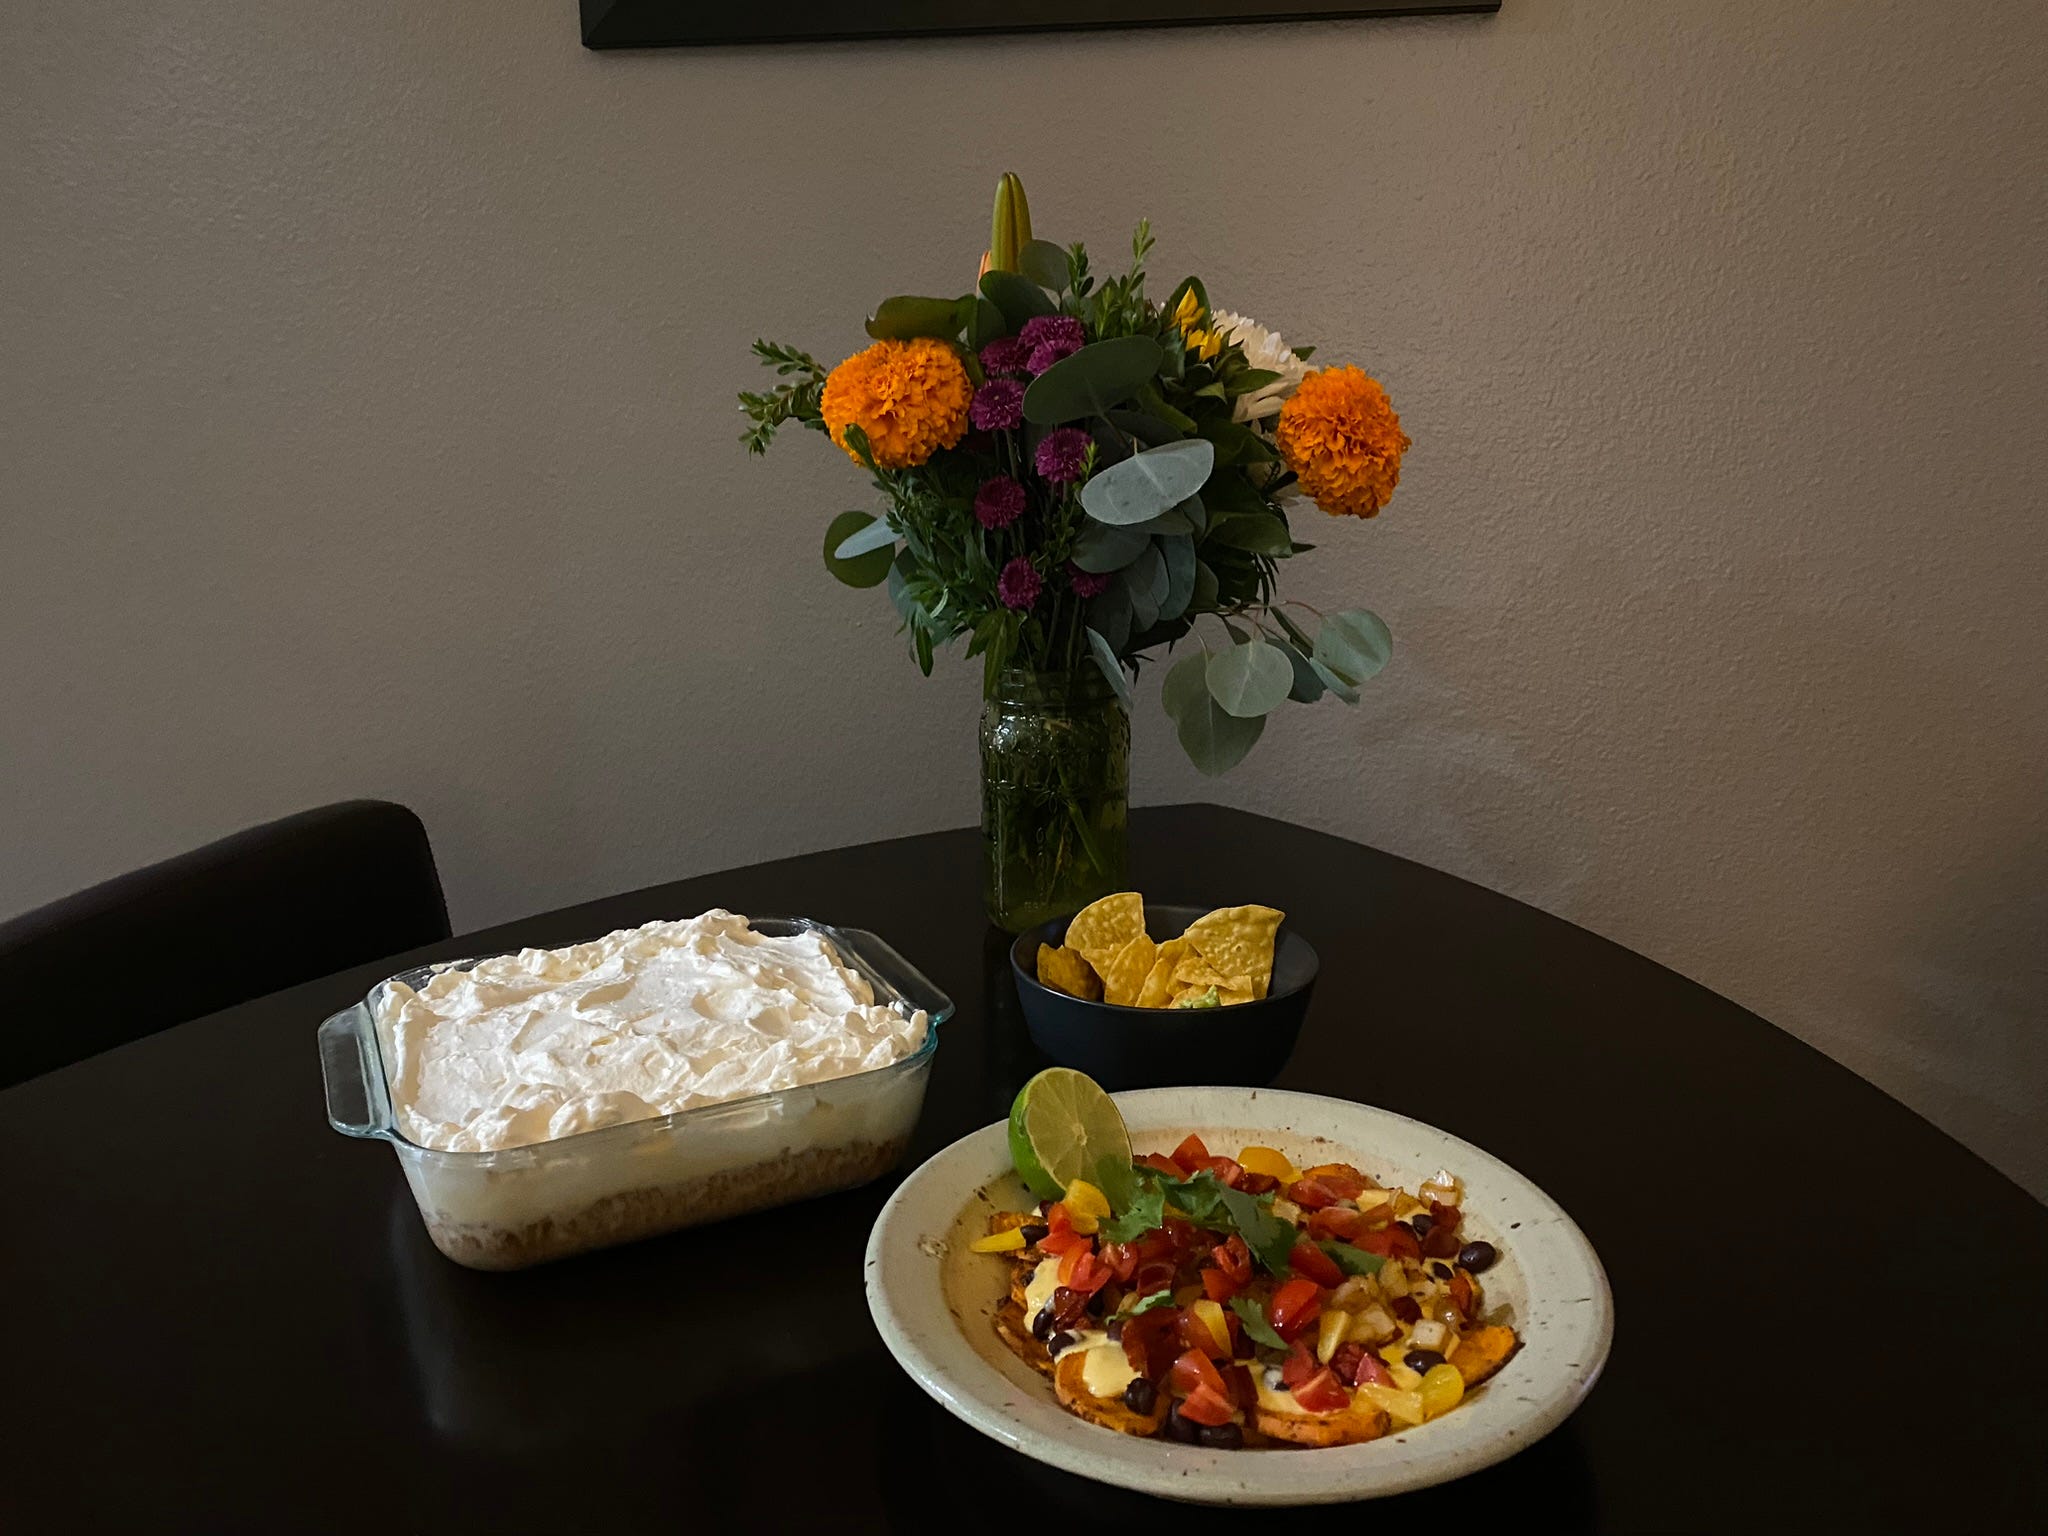 <p>For day two, I was relieved that my tres leches cake was already mostly prepped in the fridge.</p><p>I went with a simple appetizer of <a href="https://www.insider.com/which-brand-tortilla-chips-should-i-get-at-store-ranking-review">fresh guacamole</a> and tortilla chips and a veggie-packed dinner of sweet-potato "nachos."</p><p>I didn't feel like making a big dinner when the time to cook came around, and this is normally a time when I'd just make something fast, like grilled cheese, or order something from a restaurant.</p><p>But I pushed through and was glad I did because the entire meal tasted great.</p><p>Yet again, I had a lot of dishes to clean up at the end of the day but I tried to find some gratitude that I could make such a tasty, veggie-packed meal on a busy Monday.</p>